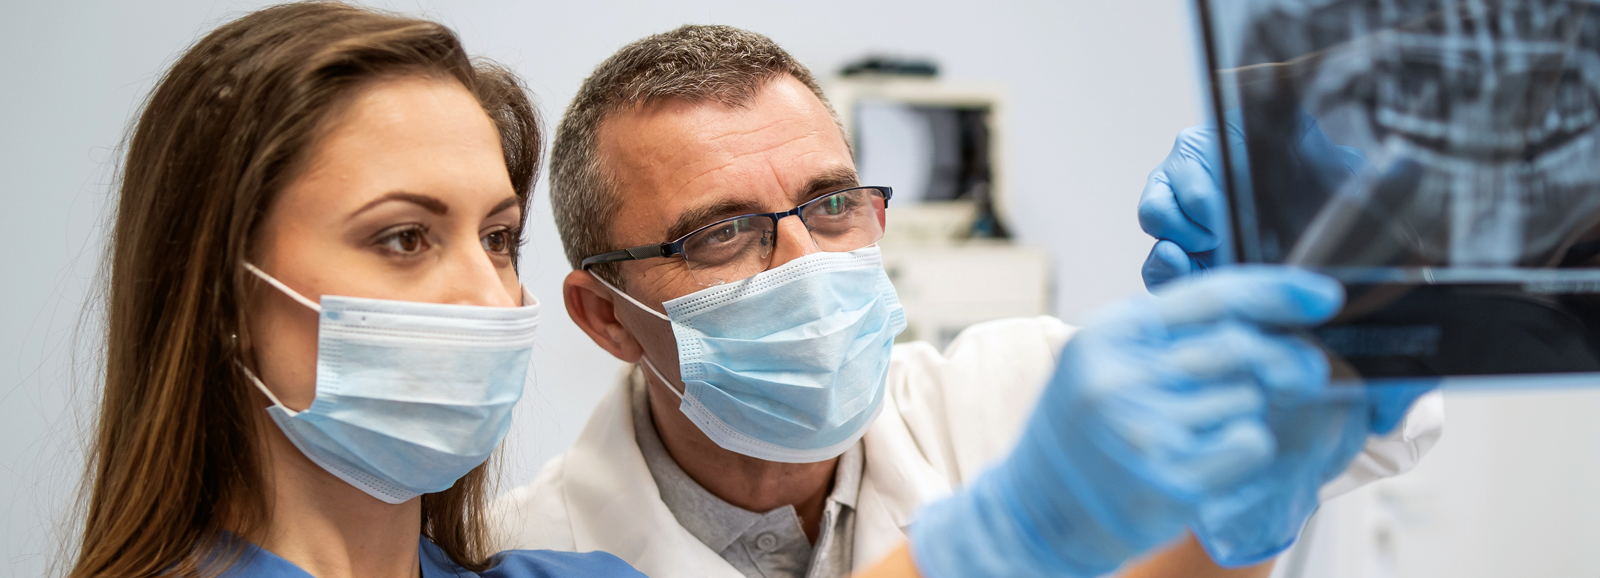 dentist-and-dental-hygenist-1600x578.png